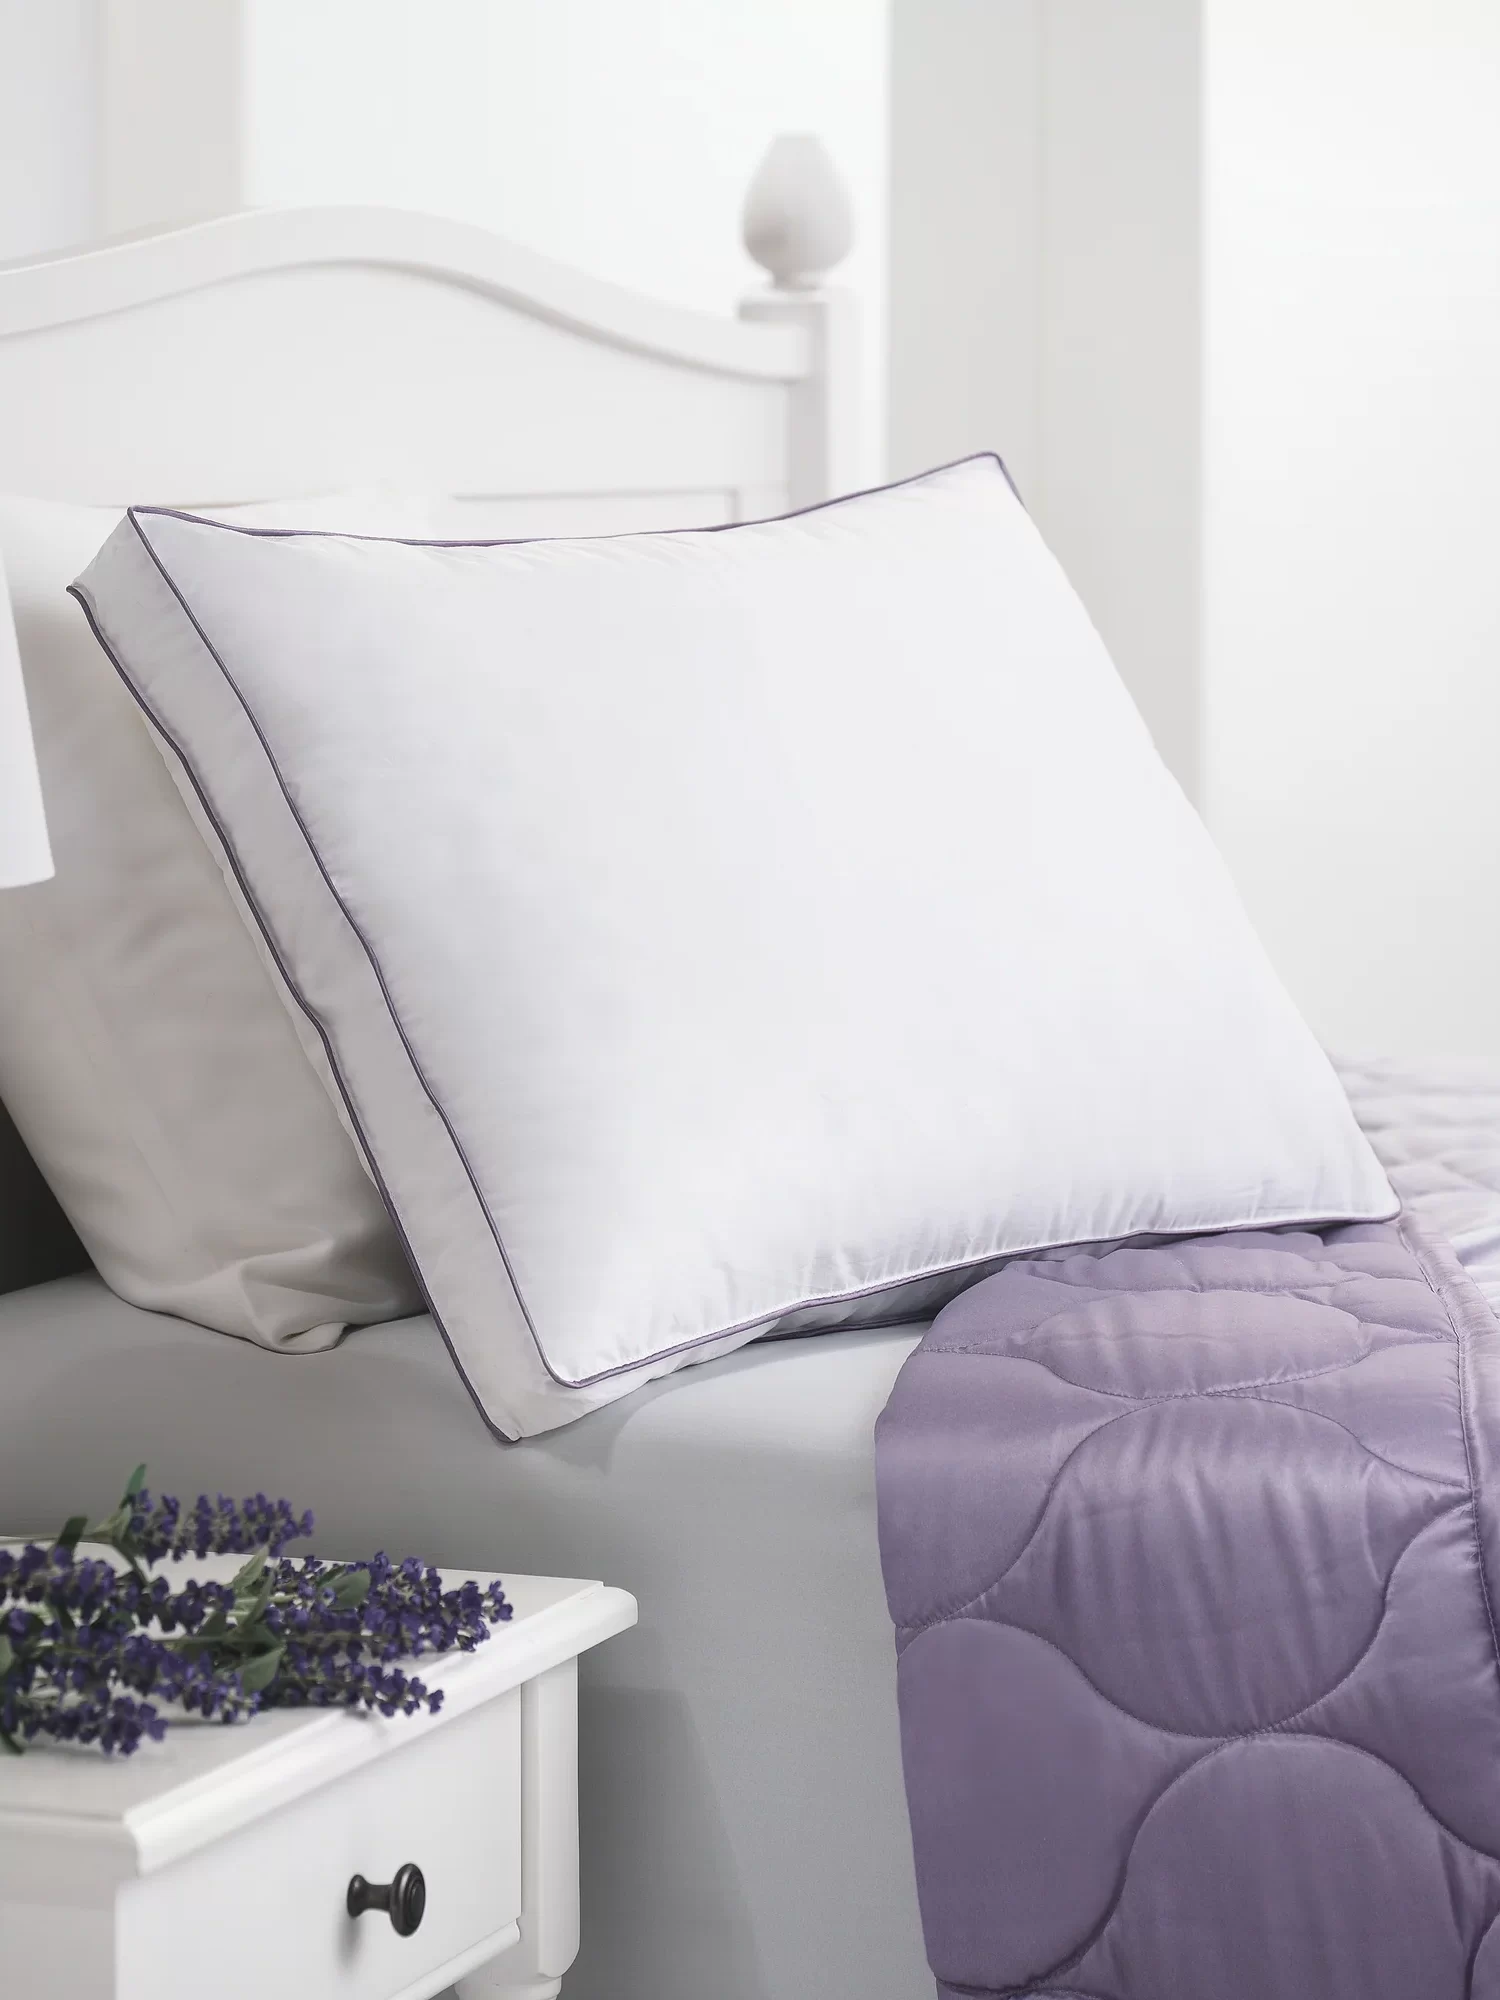 Sleep Lavender Scented - Pillow
